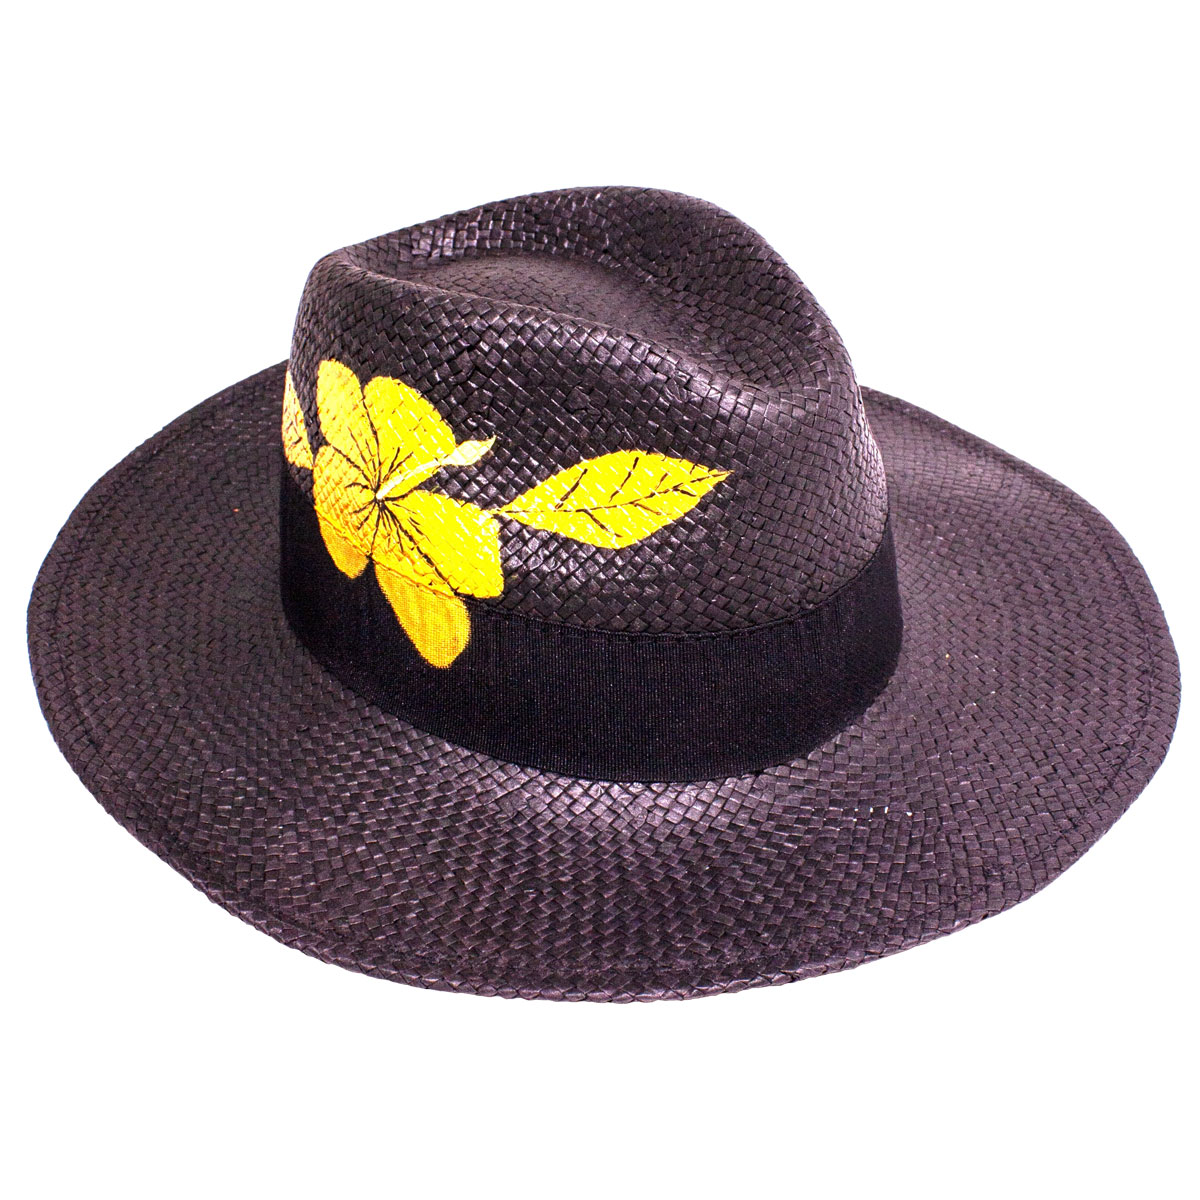 Panama style, summer straw hat, black with hand drawn flower and leaves